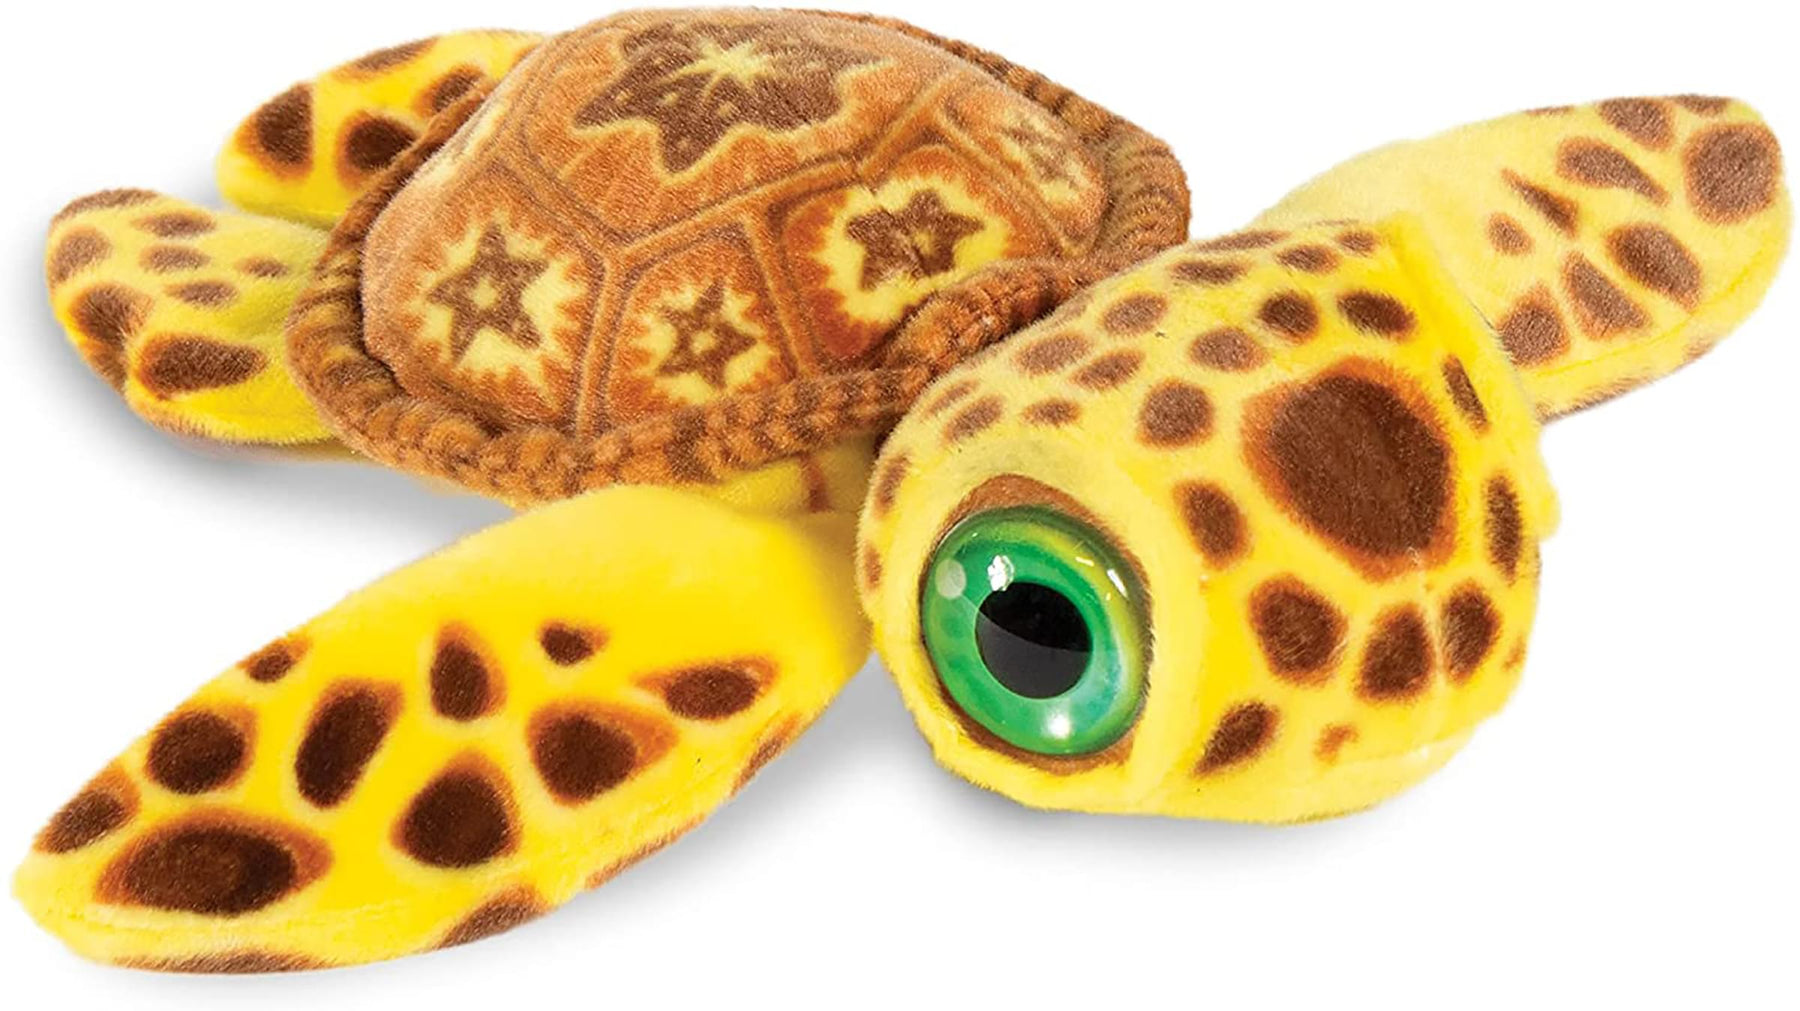 Real Planet Big Eyes Turtle Brown 15 Inch Realistic Soft Plush